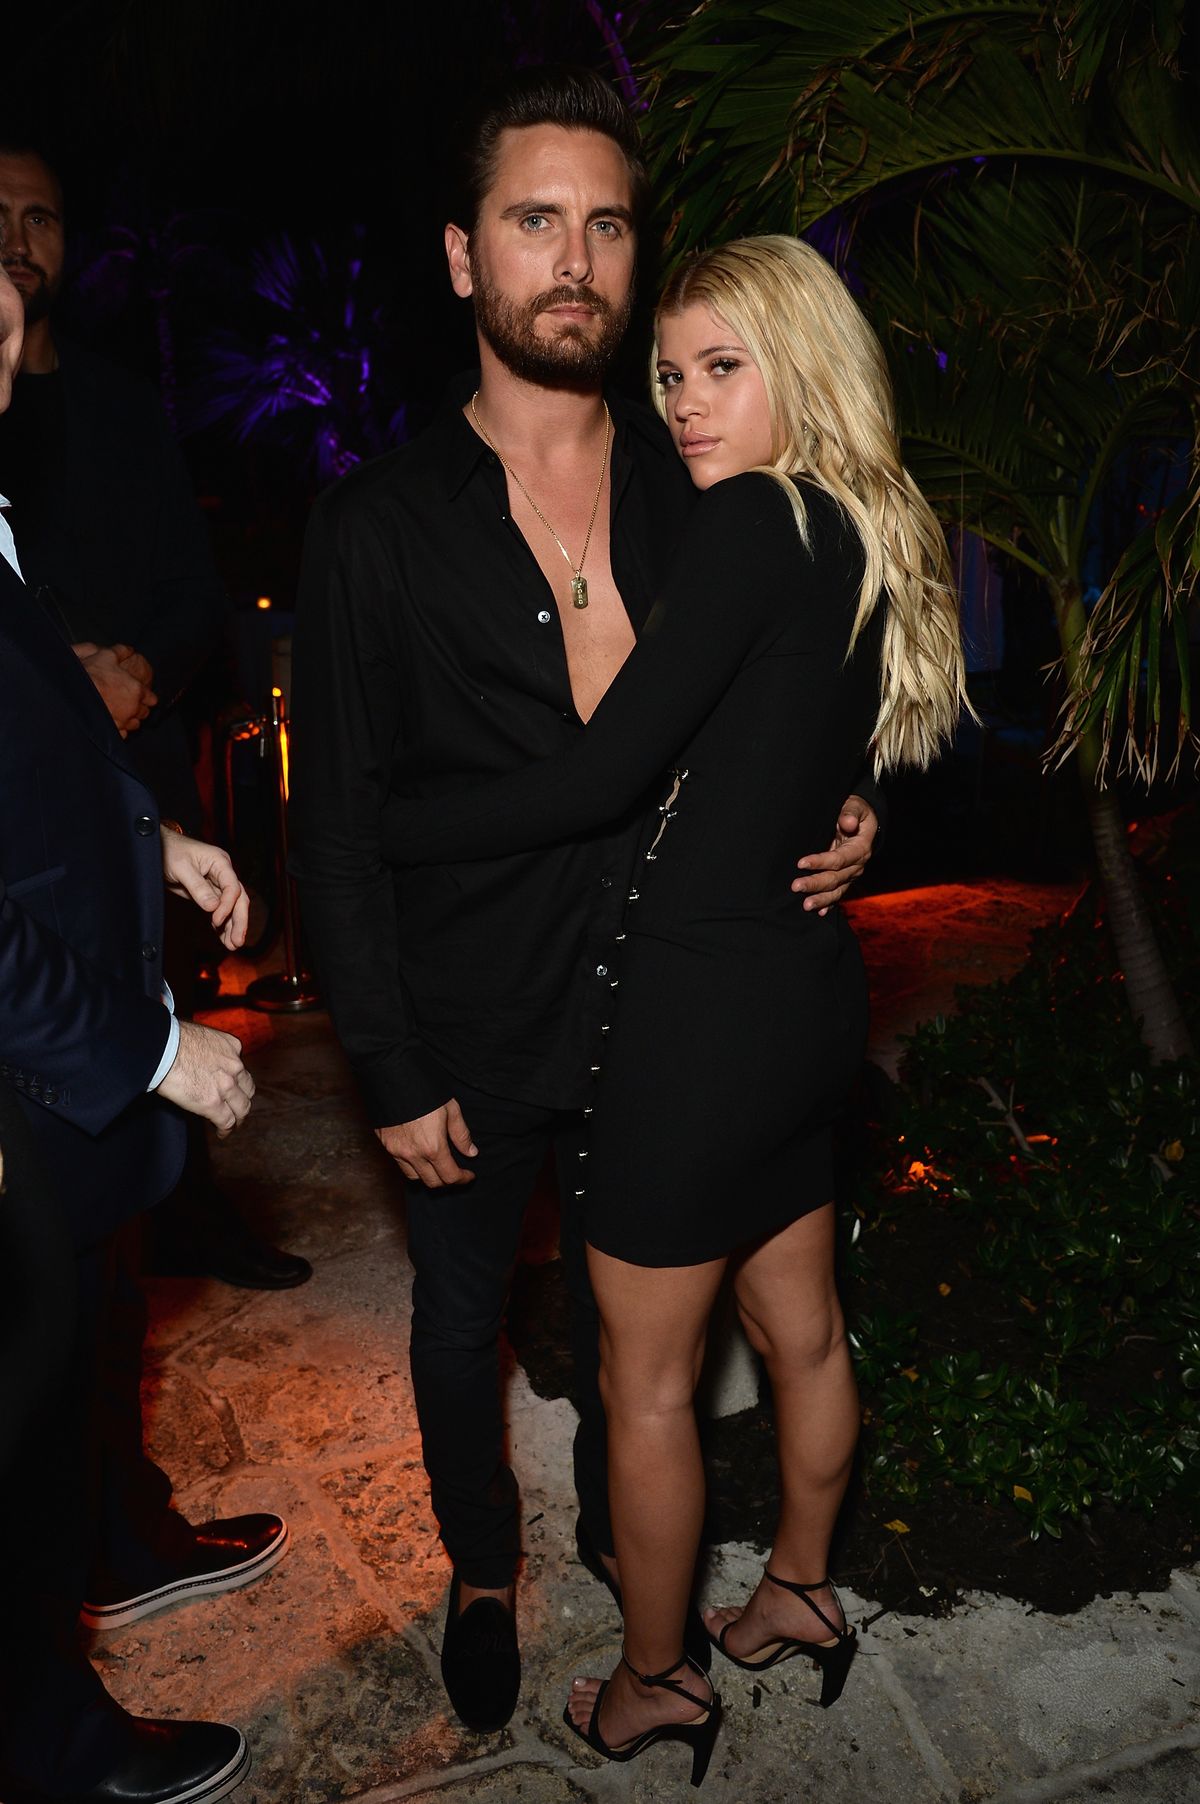 Sofia Richie And Scott Disick Seen “kissing All Night” During Their First Appearance As A Couple